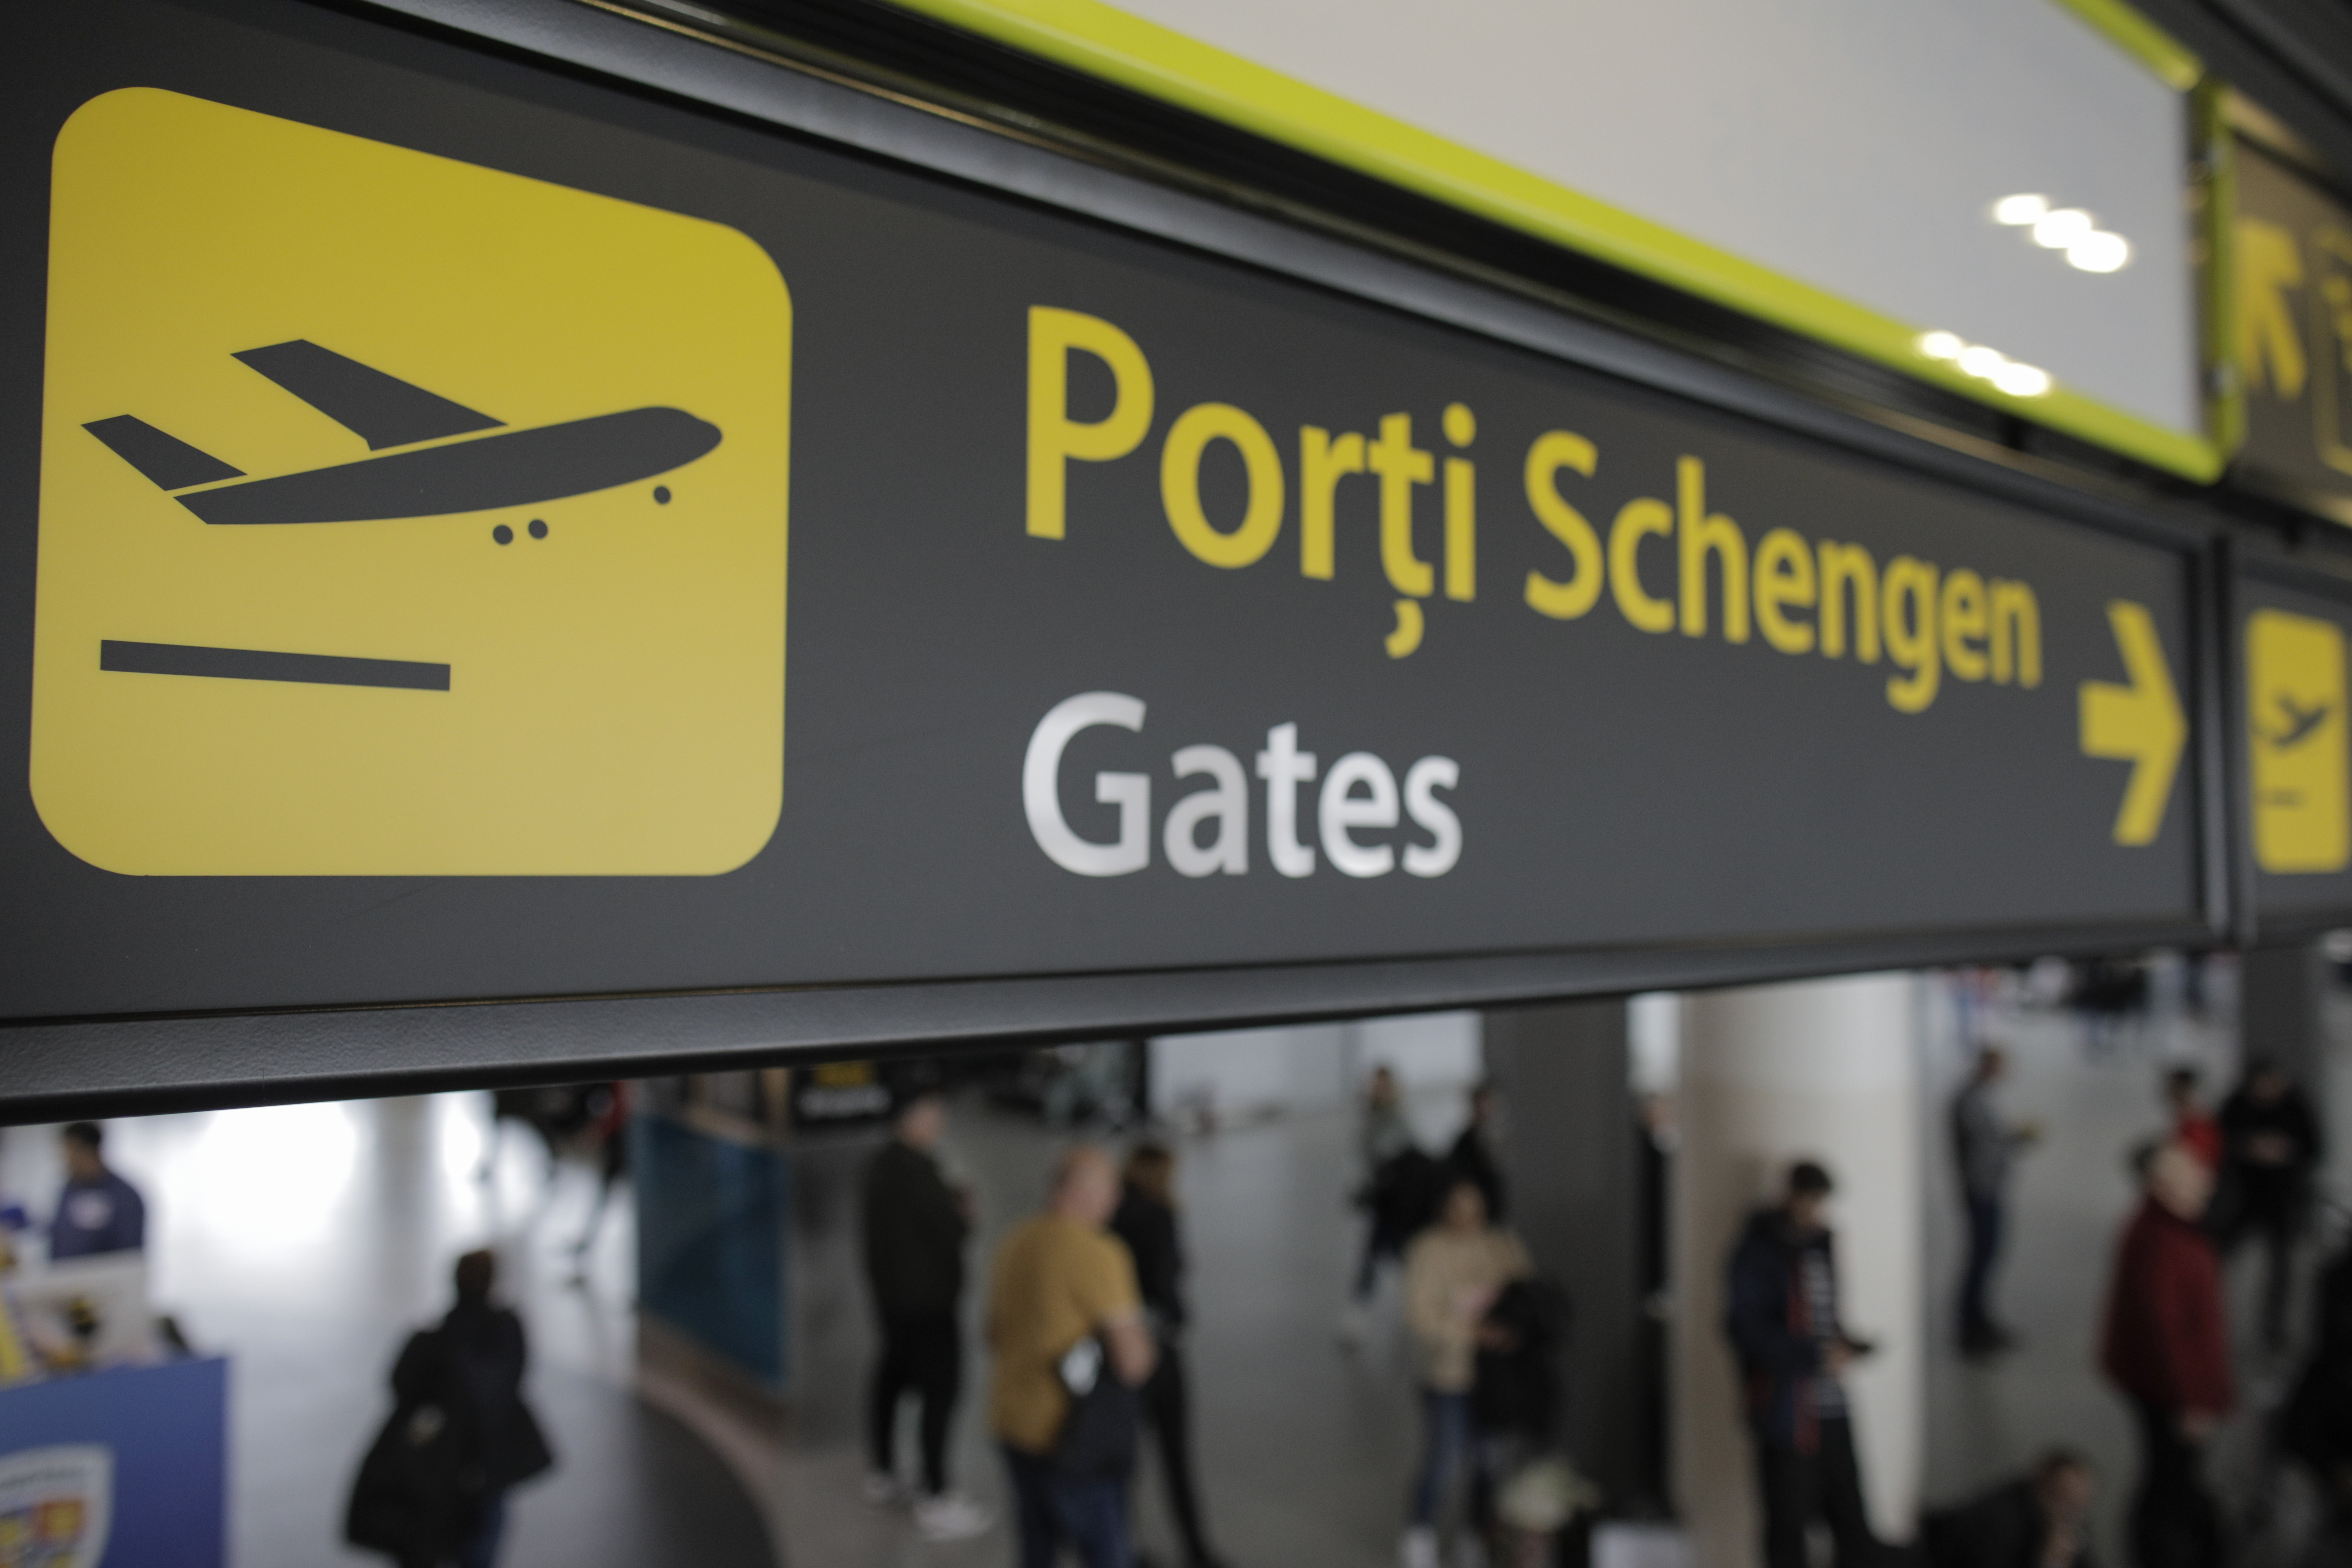 Romania opens new terminals at Timisoara, Iasi airports in time for Air Schengen